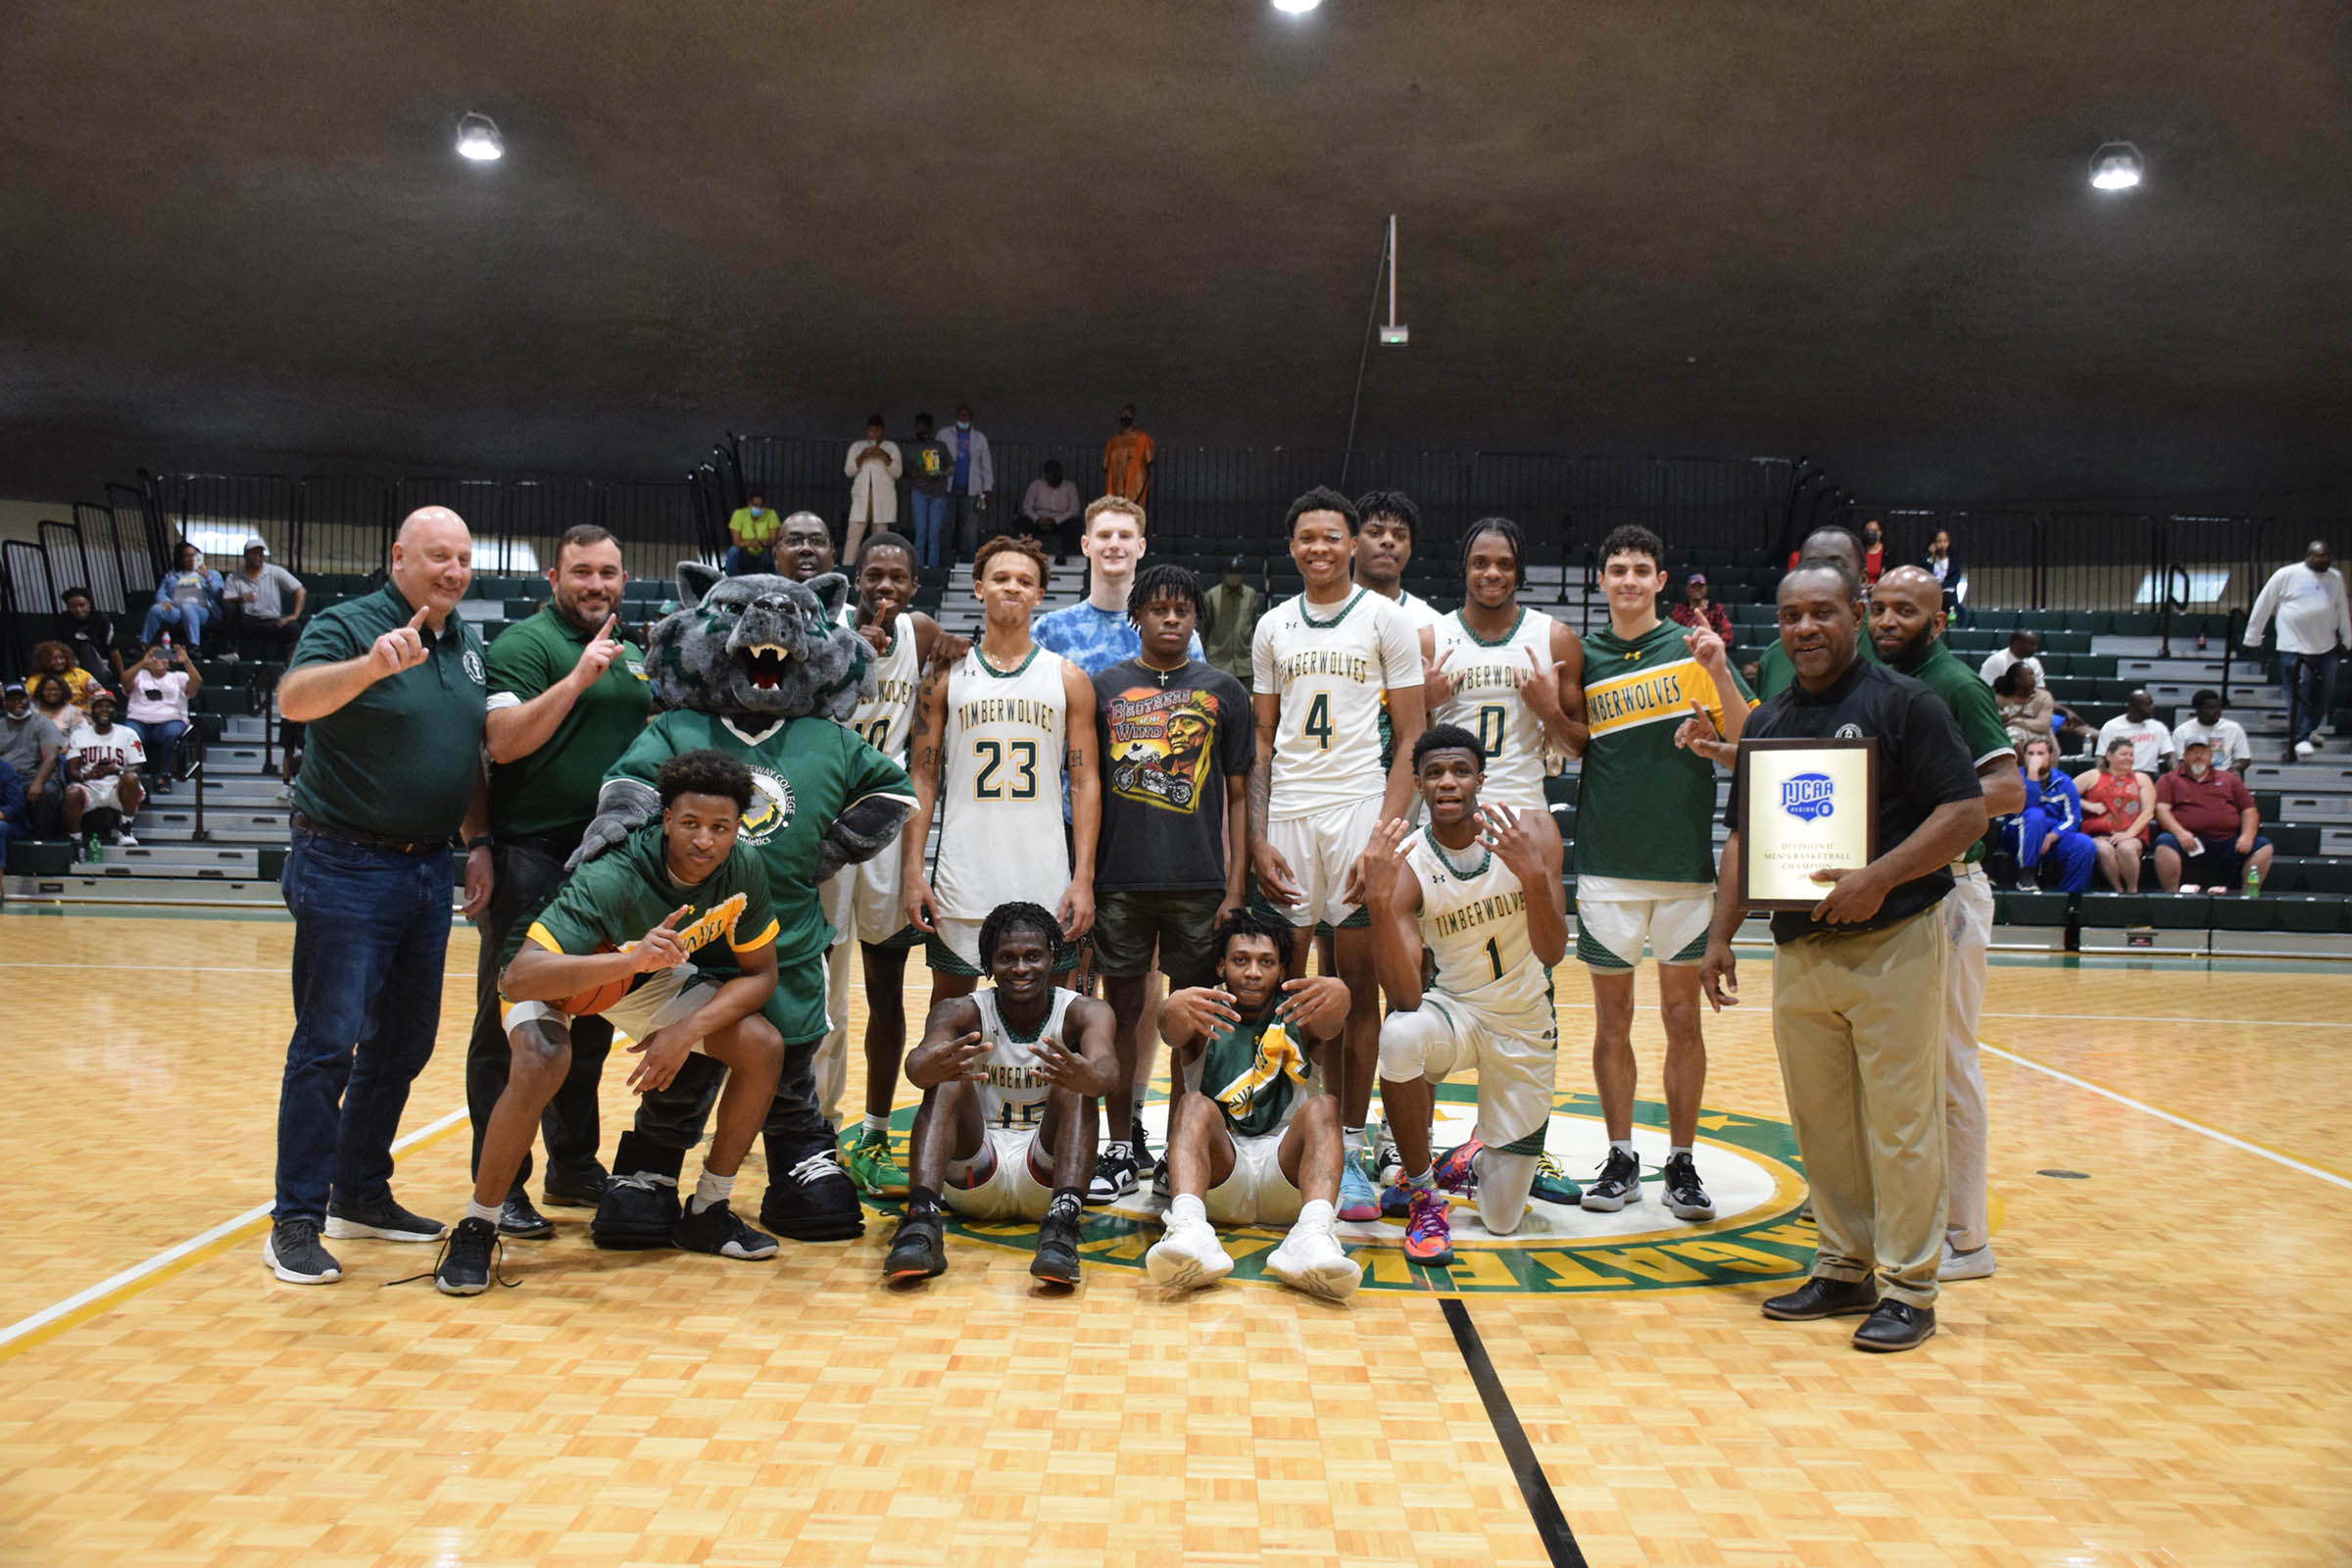 FGC Timberwolves Win Conference Championship, Will Play in NC Saturday